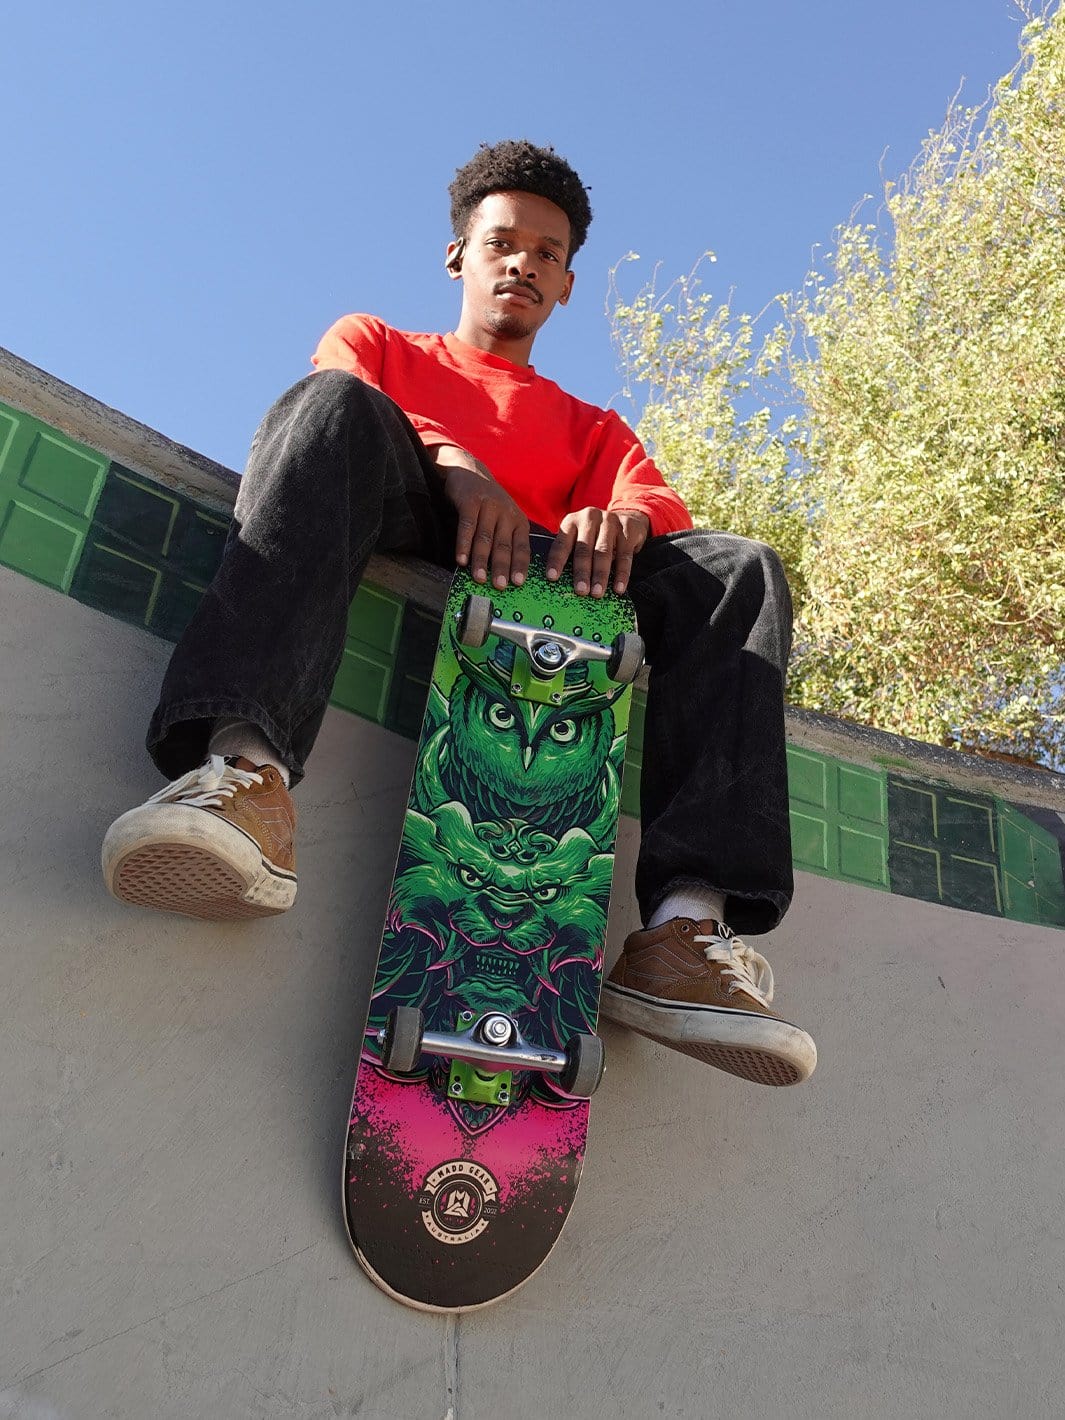 Madd Gear Skateboard Maple Popsicle 31" Pink Green Ply Aluminum Trucks High Quality Pink and Green